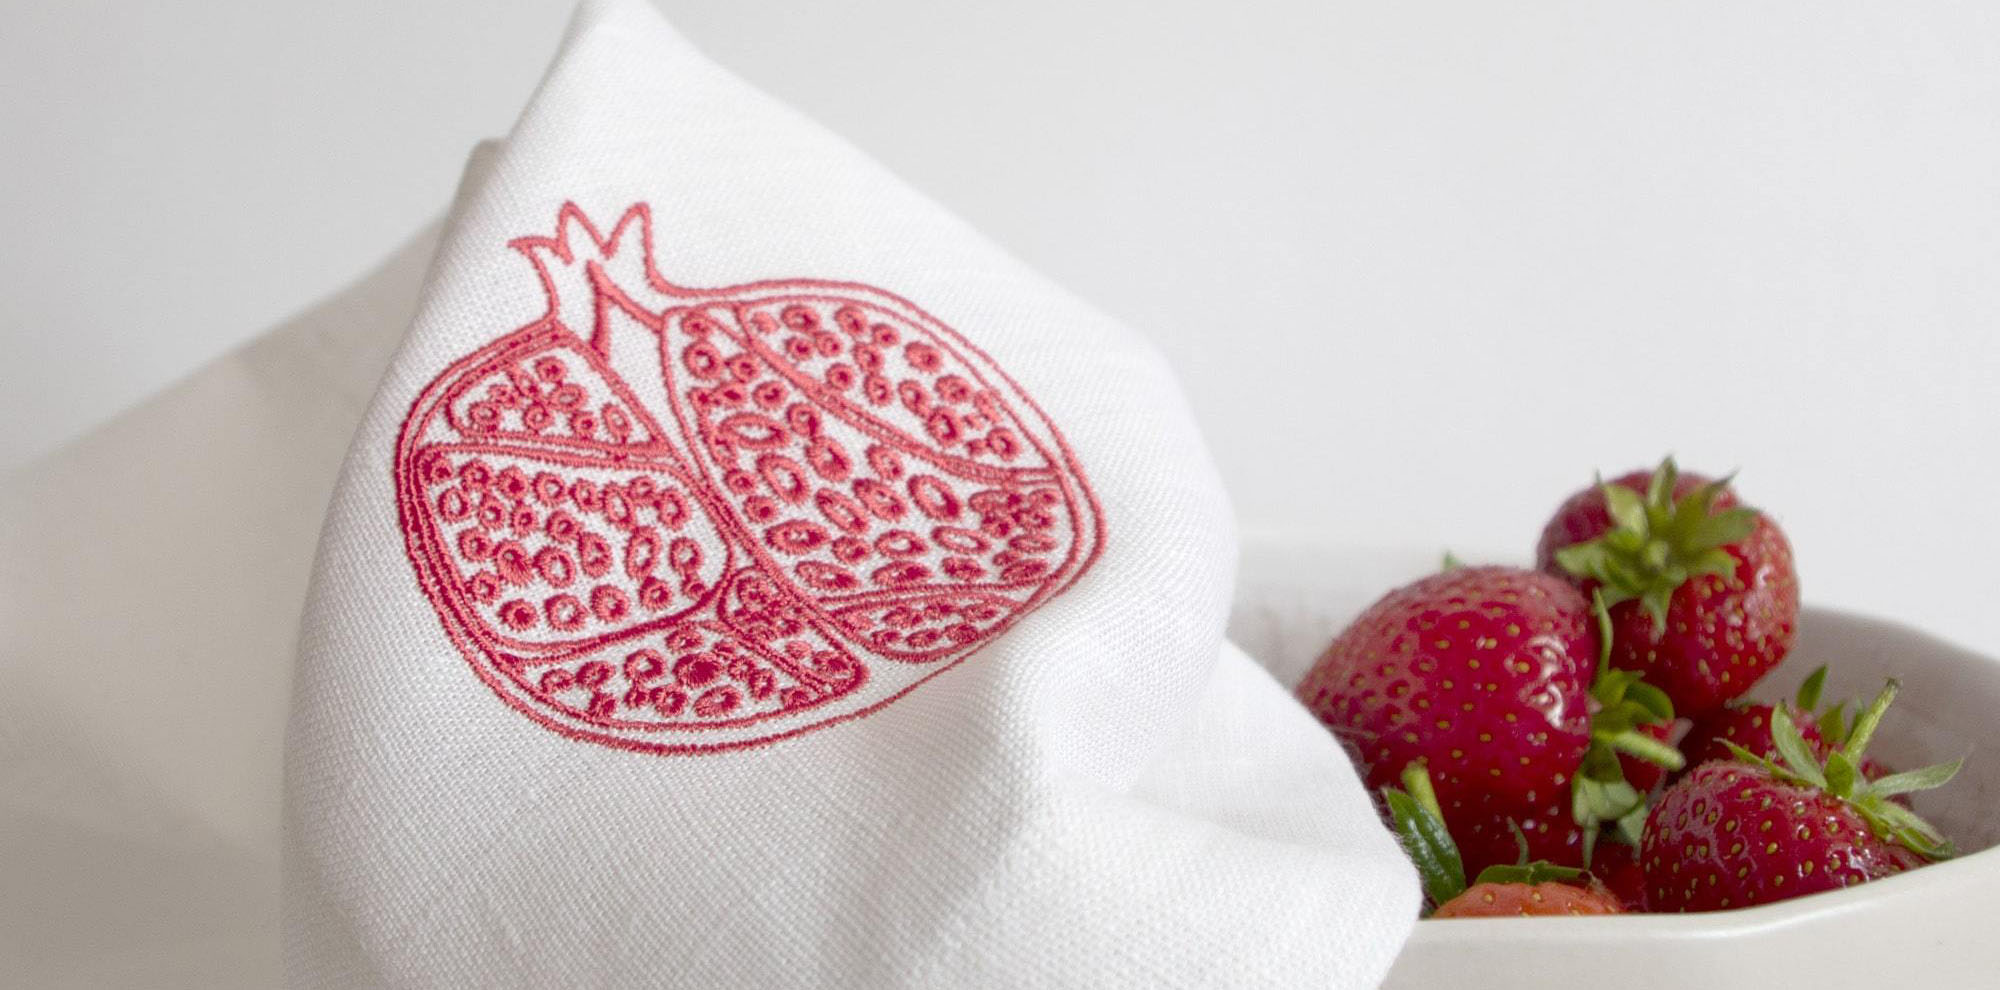 Fine Cell Work Pomegranate Collection Linen Table Mats Napkins Cushion Embroidered Handmade in Prison